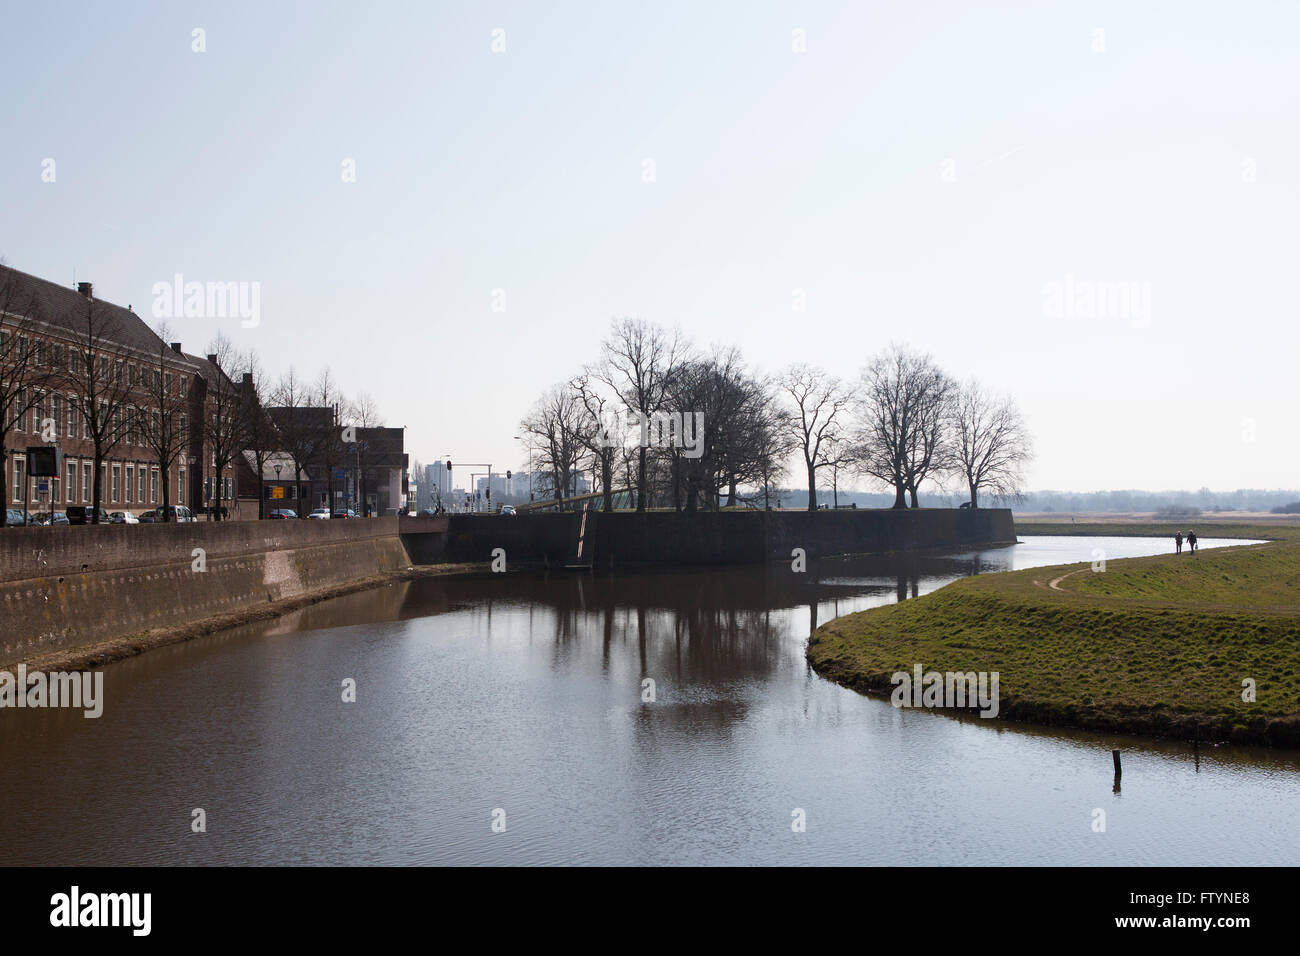 A moat protecting 's-Hertogenbosch in the Netherlands. The waterway flows around the city ramparts. Stock Photo